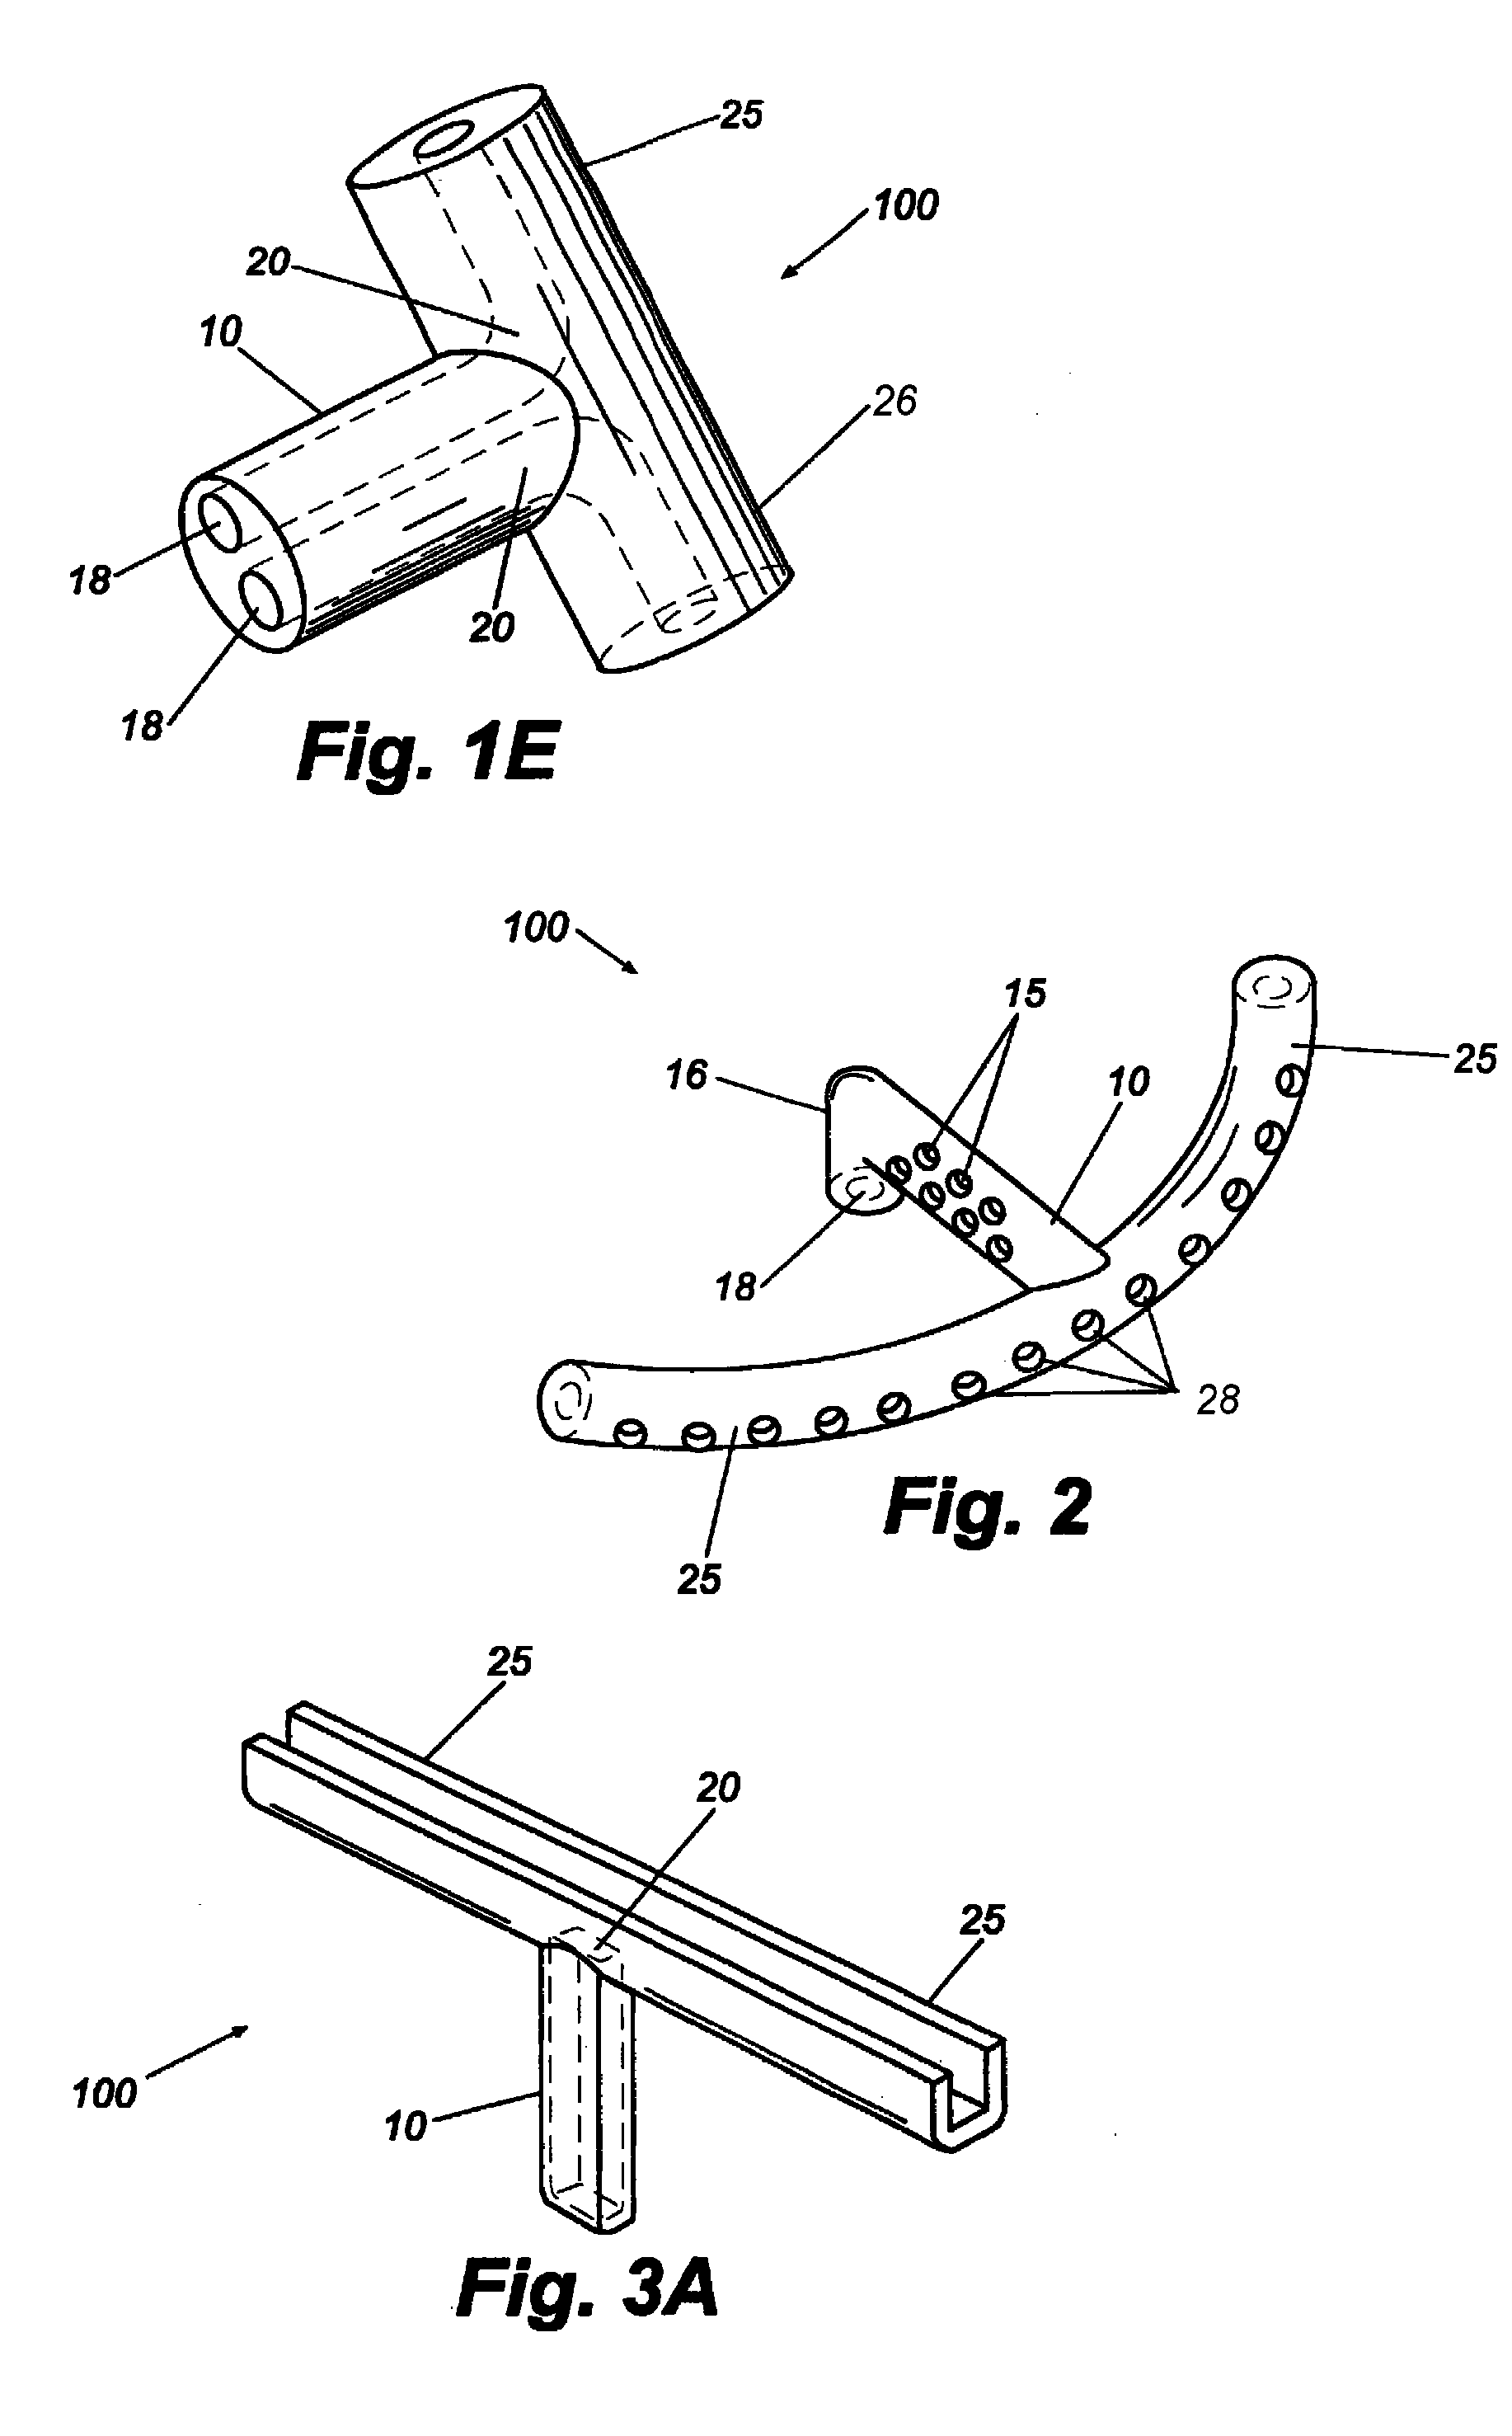 Dual drainage pathway shunt device and method for treating glaucoma